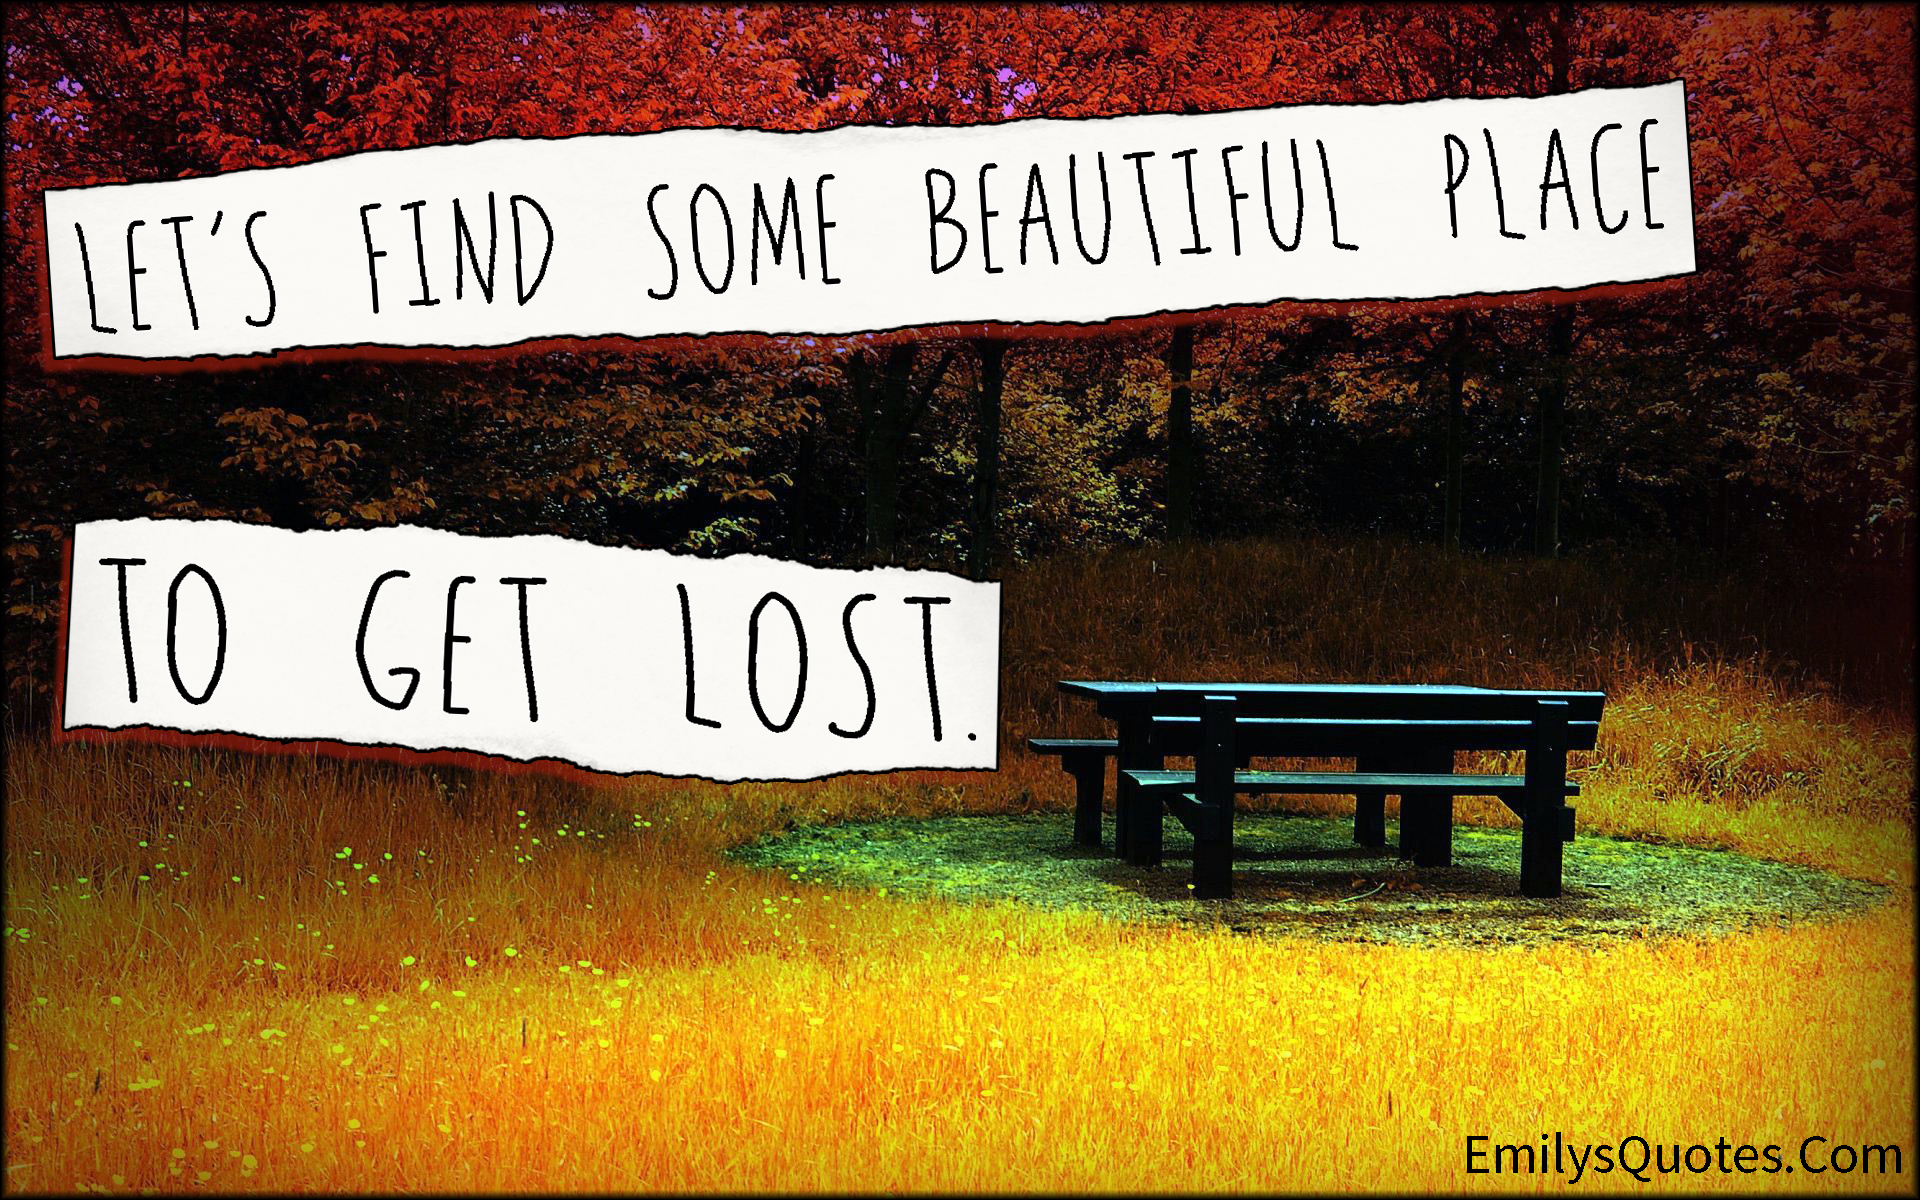 Let’s find some beautiful place to get lost